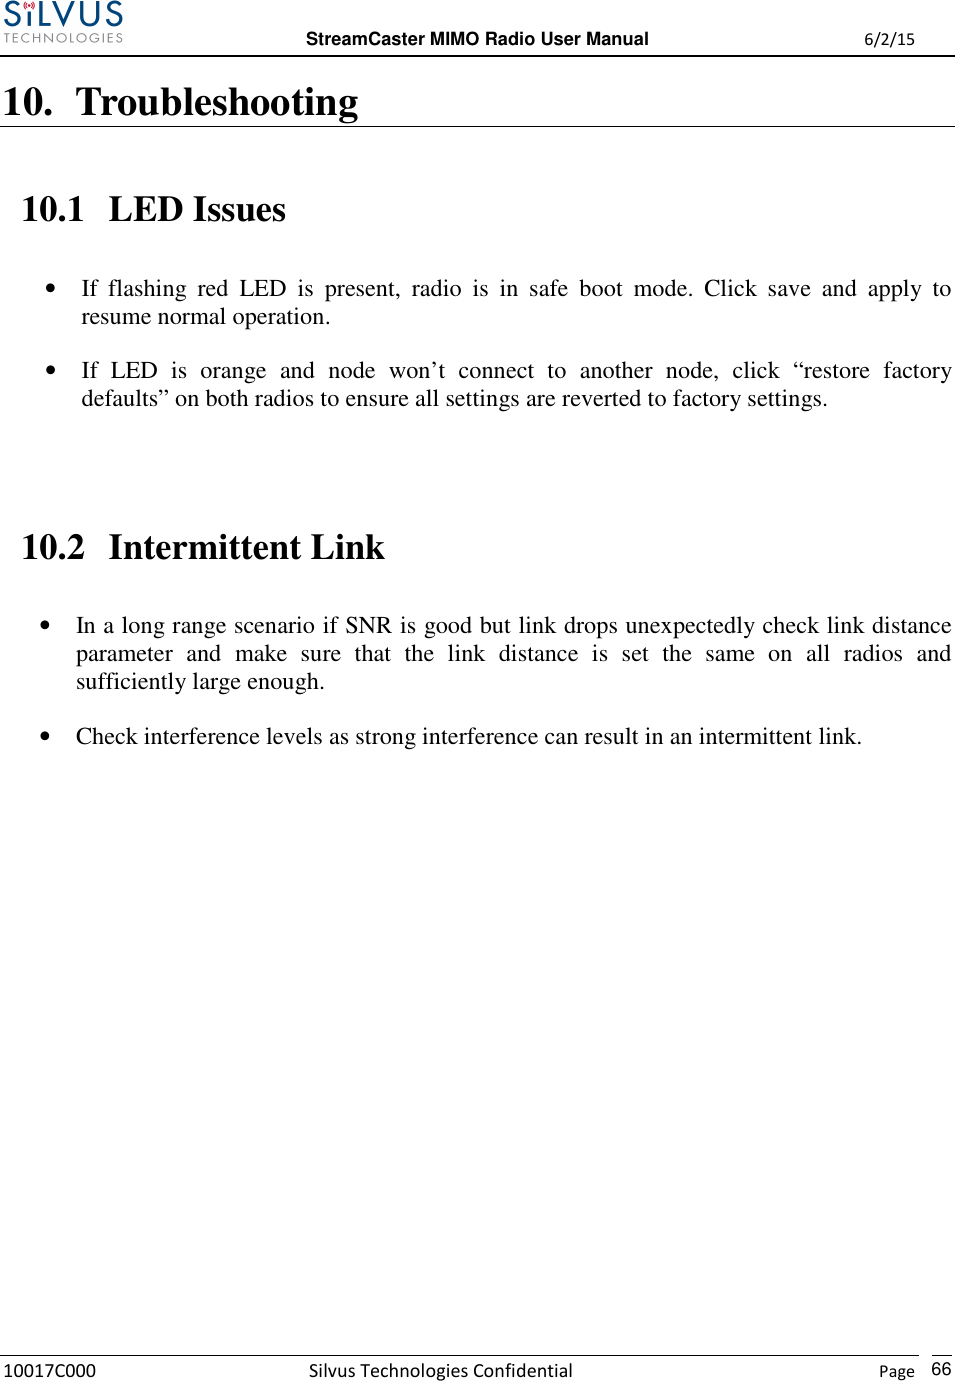  StreamCaster MIMO Radio User Manual  6/2/15 10017C000 Silvus Technologies Confidential    Page   66 10. Troubleshooting 10.1 LED Issues • If  flashing  red  LED  is  present,  radio  is  in  safe  boot  mode.  Click  save  and  apply  to resume normal operation. • If  LED  is  orange  and  node  won’t  connect  to  another  node,  click  “restore  factory defaults” on both radios to ensure all settings are reverted to factory settings.  10.2 Intermittent Link • In a long range scenario if SNR is good but link drops unexpectedly check link distance parameter  and  make  sure  that  the  link  distance  is  set  the  same  on  all  radios  and sufficiently large enough. • Check interference levels as strong interference can result in an intermittent link.             